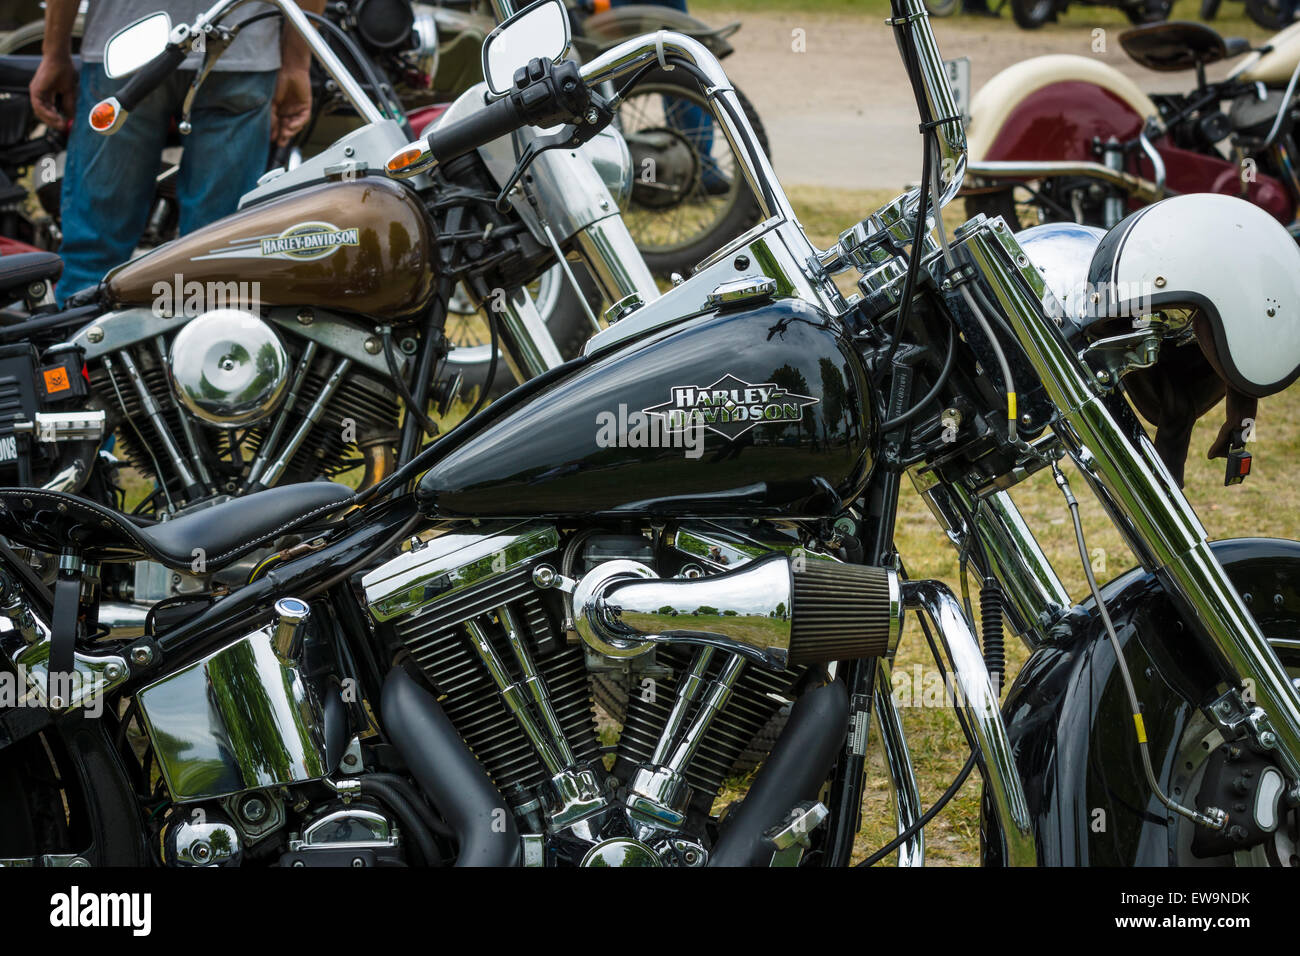 PAAREN IM GLIEN, GERMANY - MAY 23, 2015: Fragment of a motorcycle Harley-Davidson close-up. The oldtimer show in MAFZ. Stock Photo